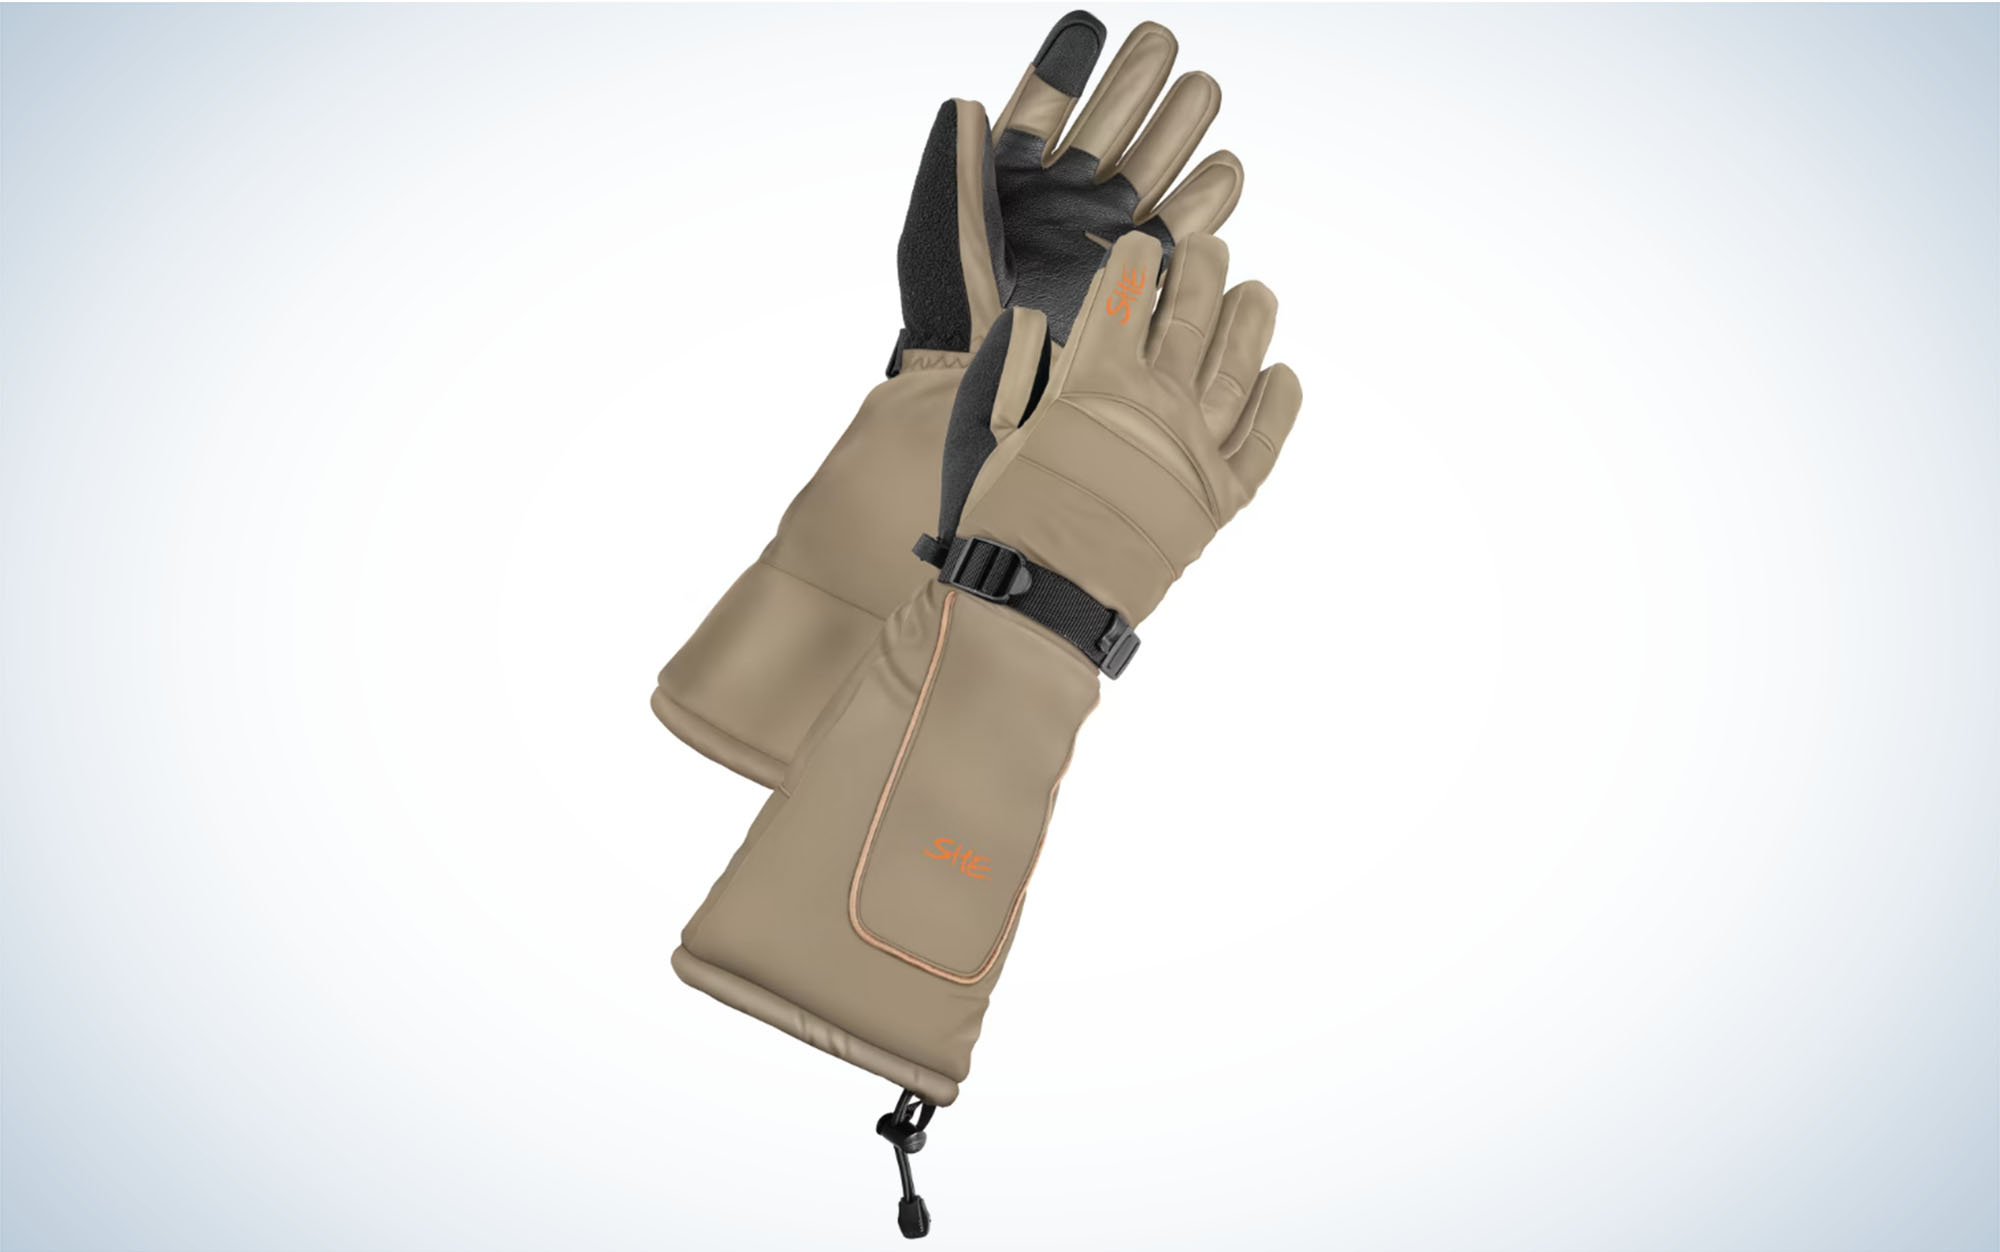 The SHE Outdoor Waterfowl Gauntlet GlovesÂ are the best gift for waterfowl hunters.